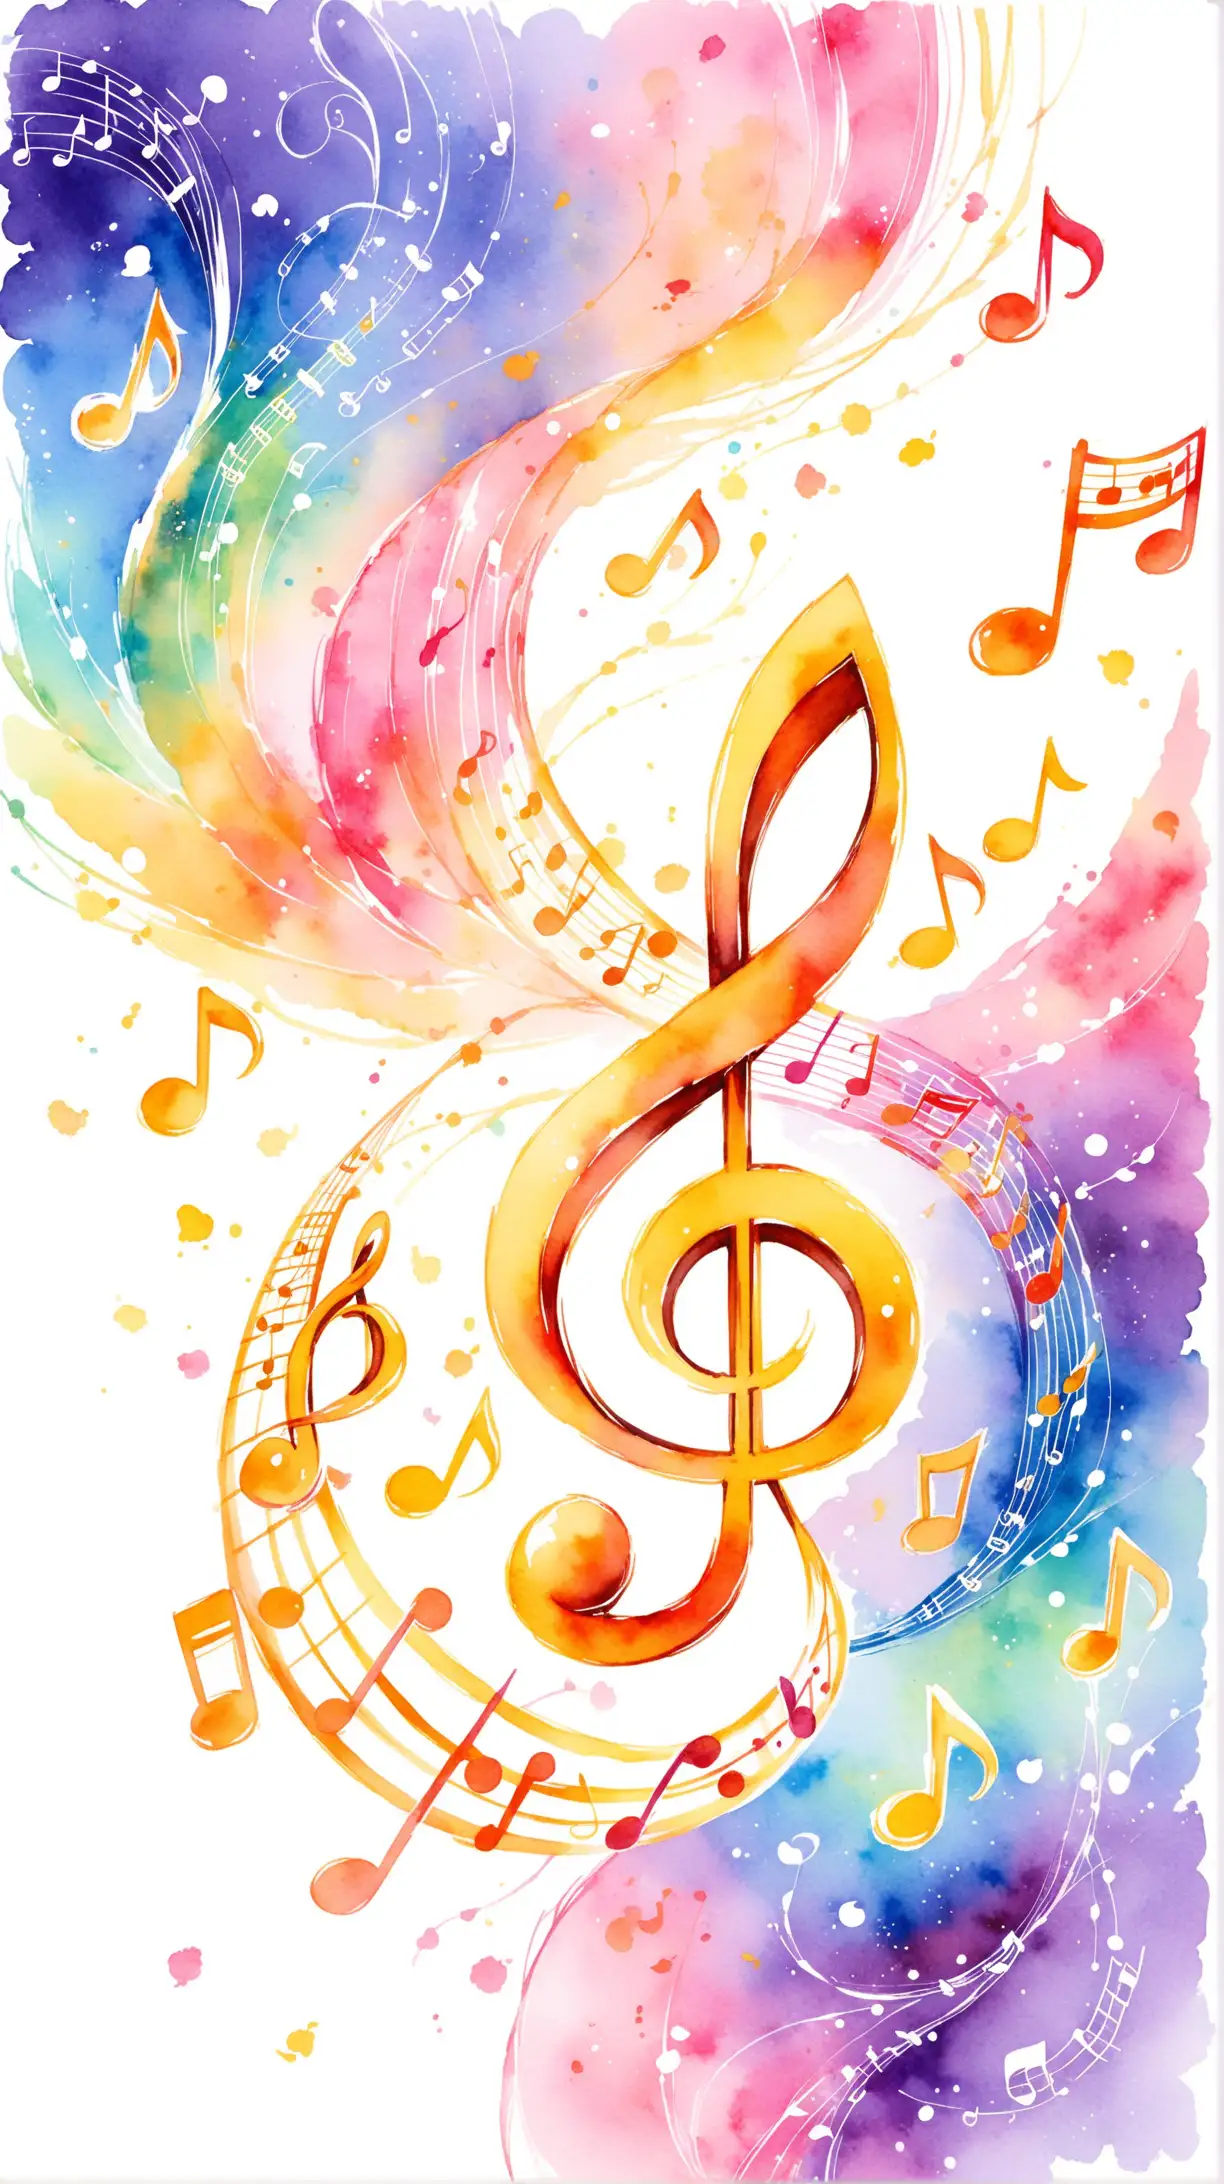 on a white background, painted in watercolor in anime style, treble clef, notes, inspiration, flight